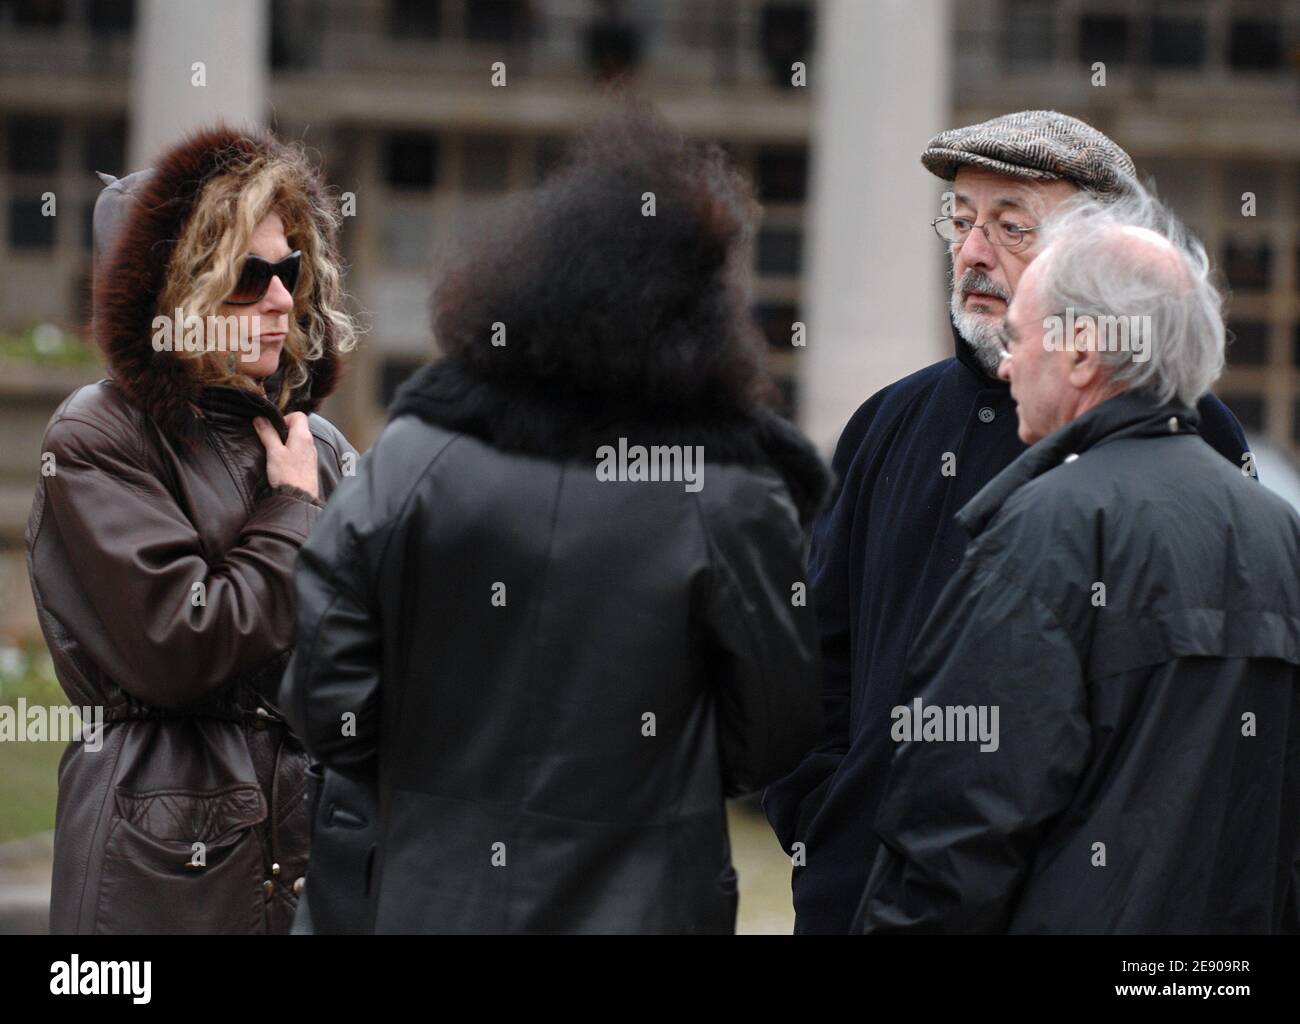 Director Bertrand Blier and Florence Moncorge attend director Pierre Granier-Deferre's funeral held at the Pere-Lachaise cemetery crematorium in Paris, France, on November 23, 2007. Photo by Khayat-Mousse/ABACAPRESS.COM Stock Photo